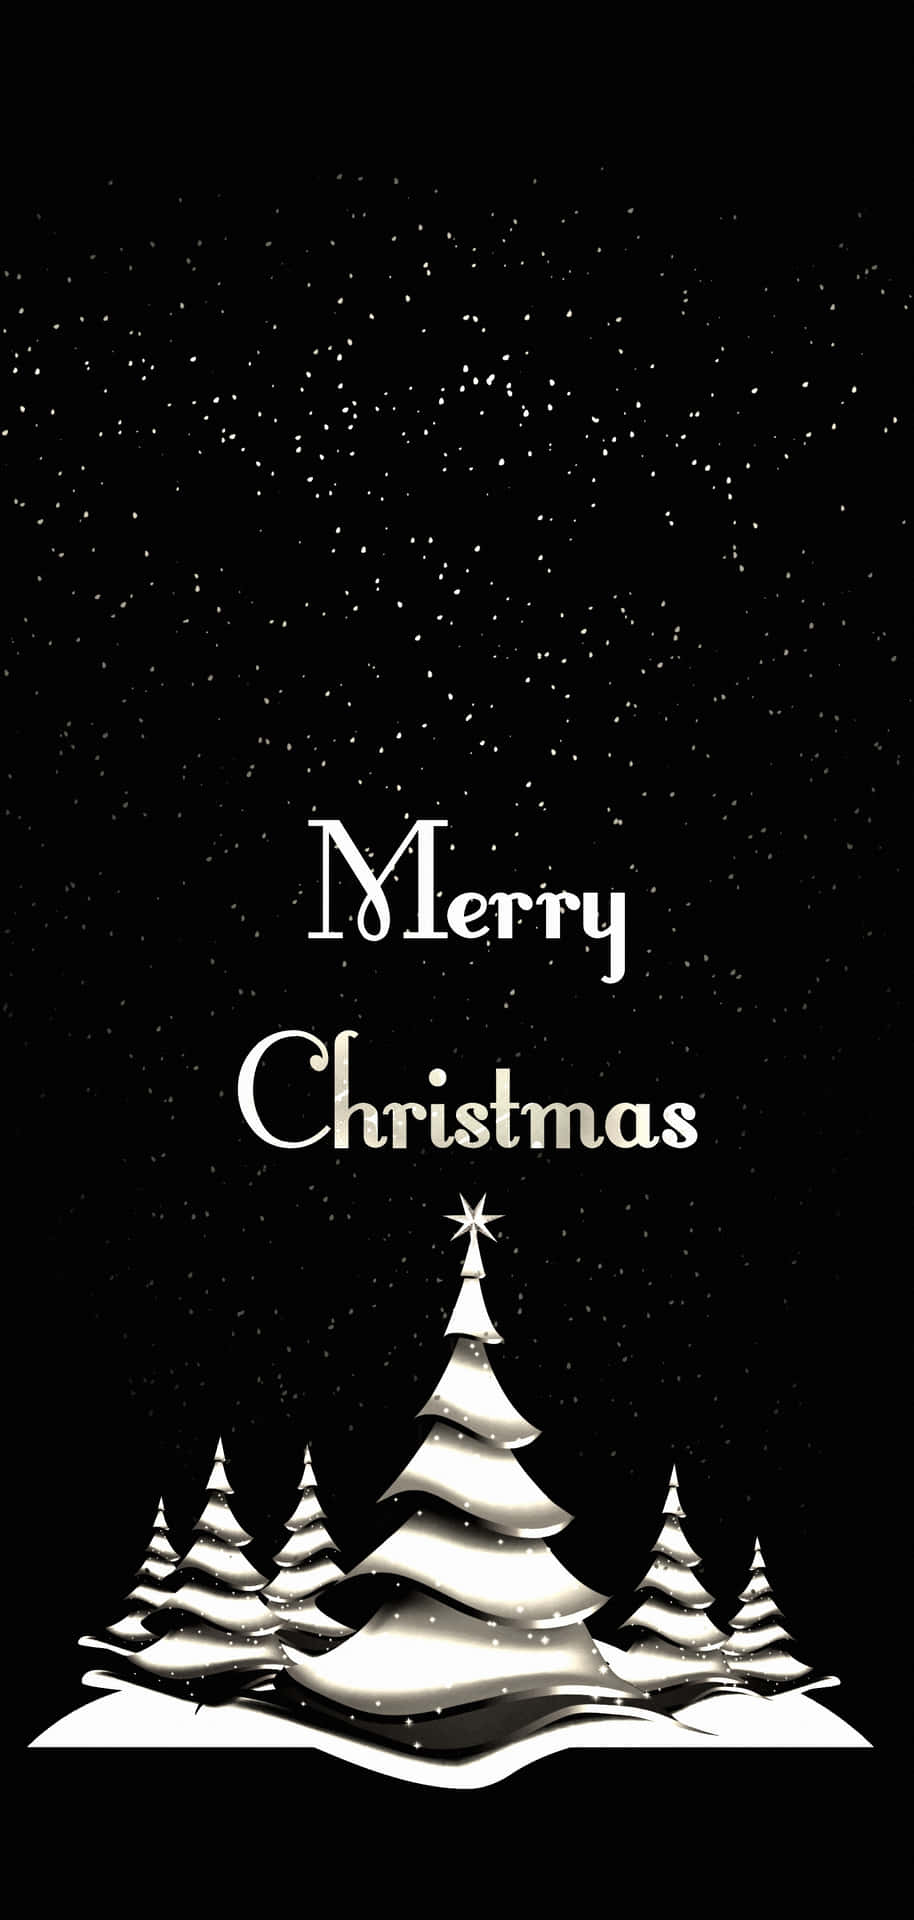 Free Merry Christmas Greetings Black And White Picture